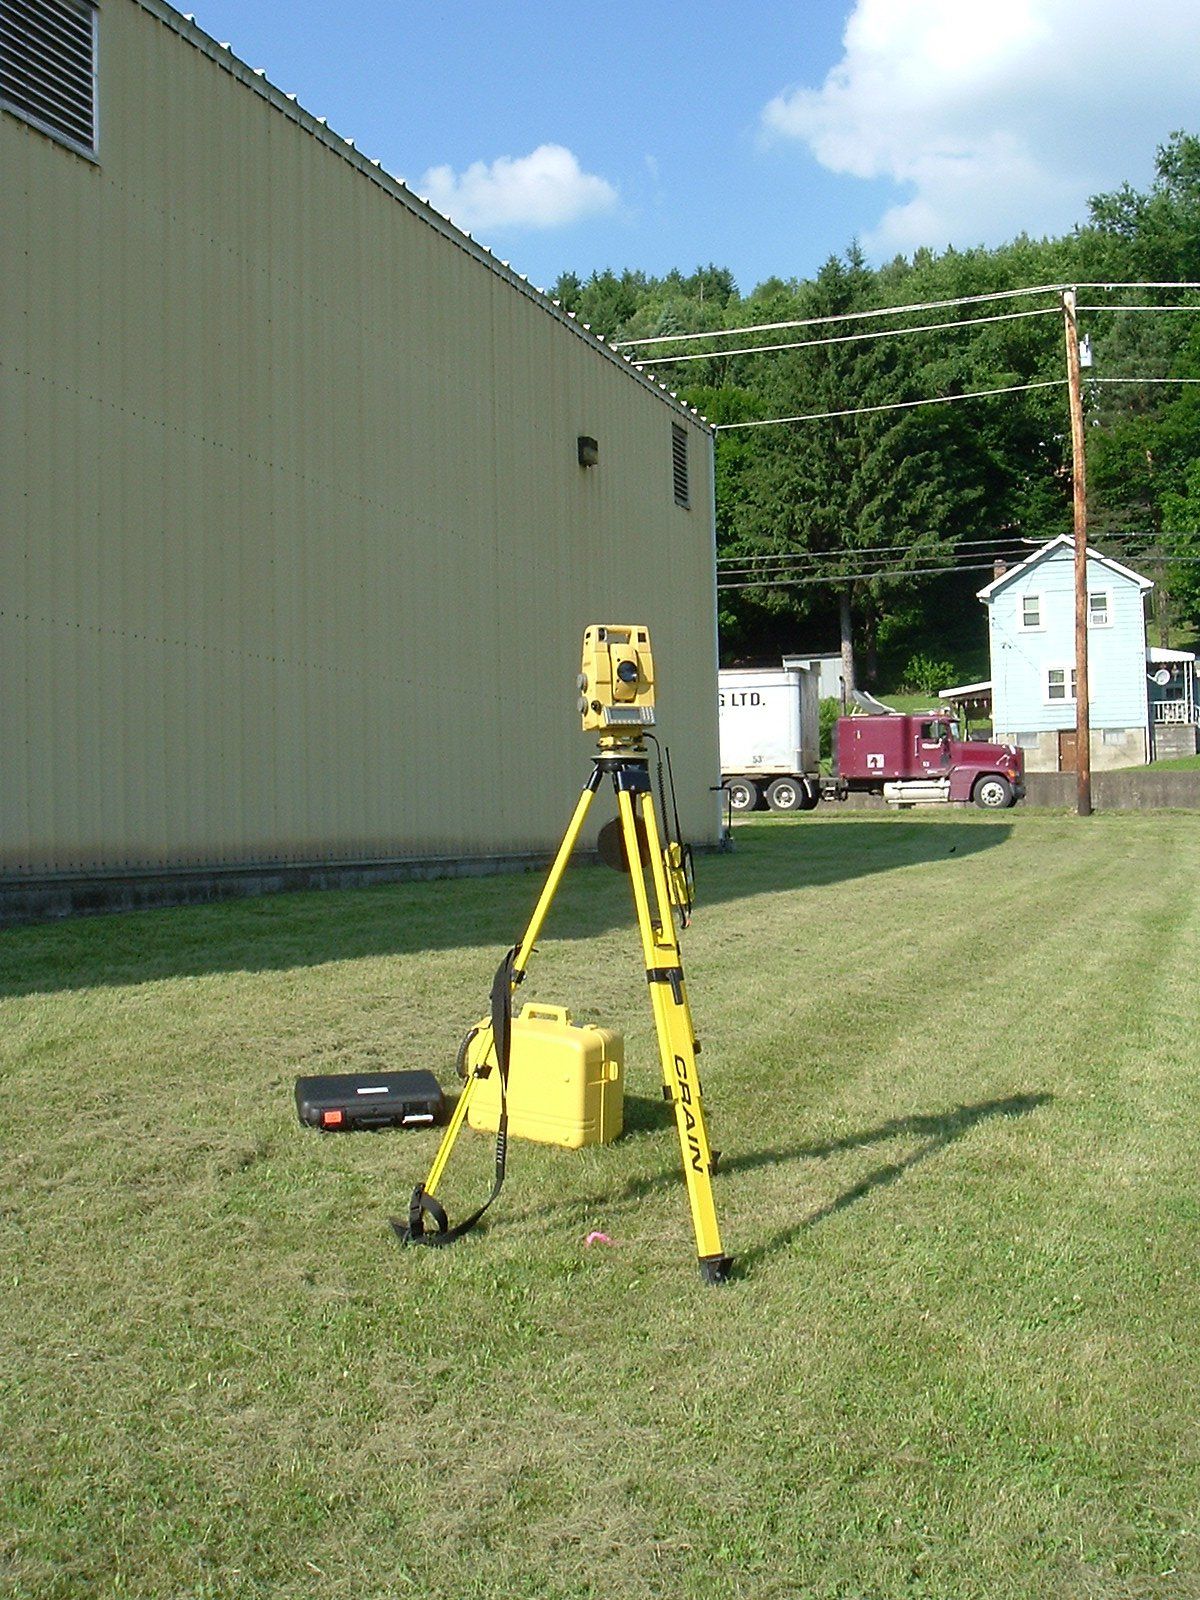 Construction - Cox Surveying in Lewis Run, PA.